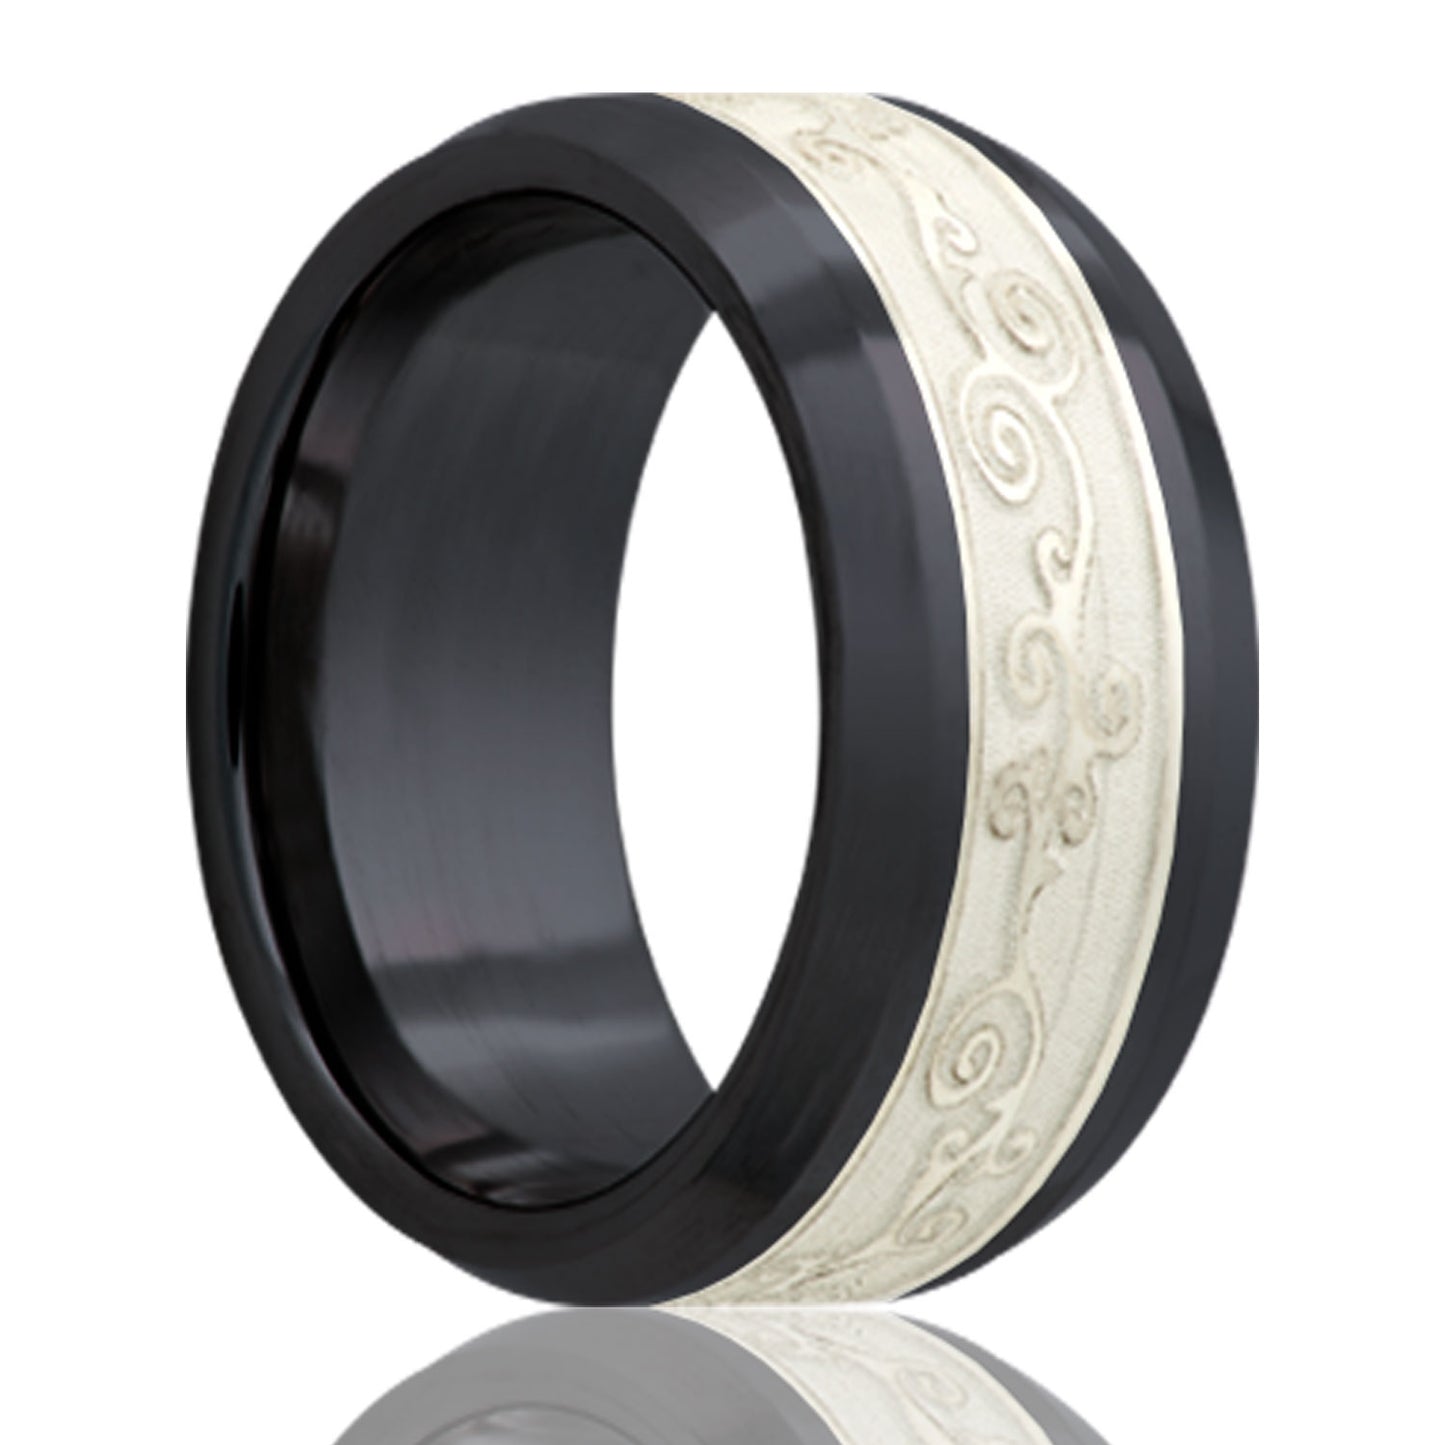 A scroll pattern silver inlay zirconium wedding band with beveled edges displayed on a neutral white background.